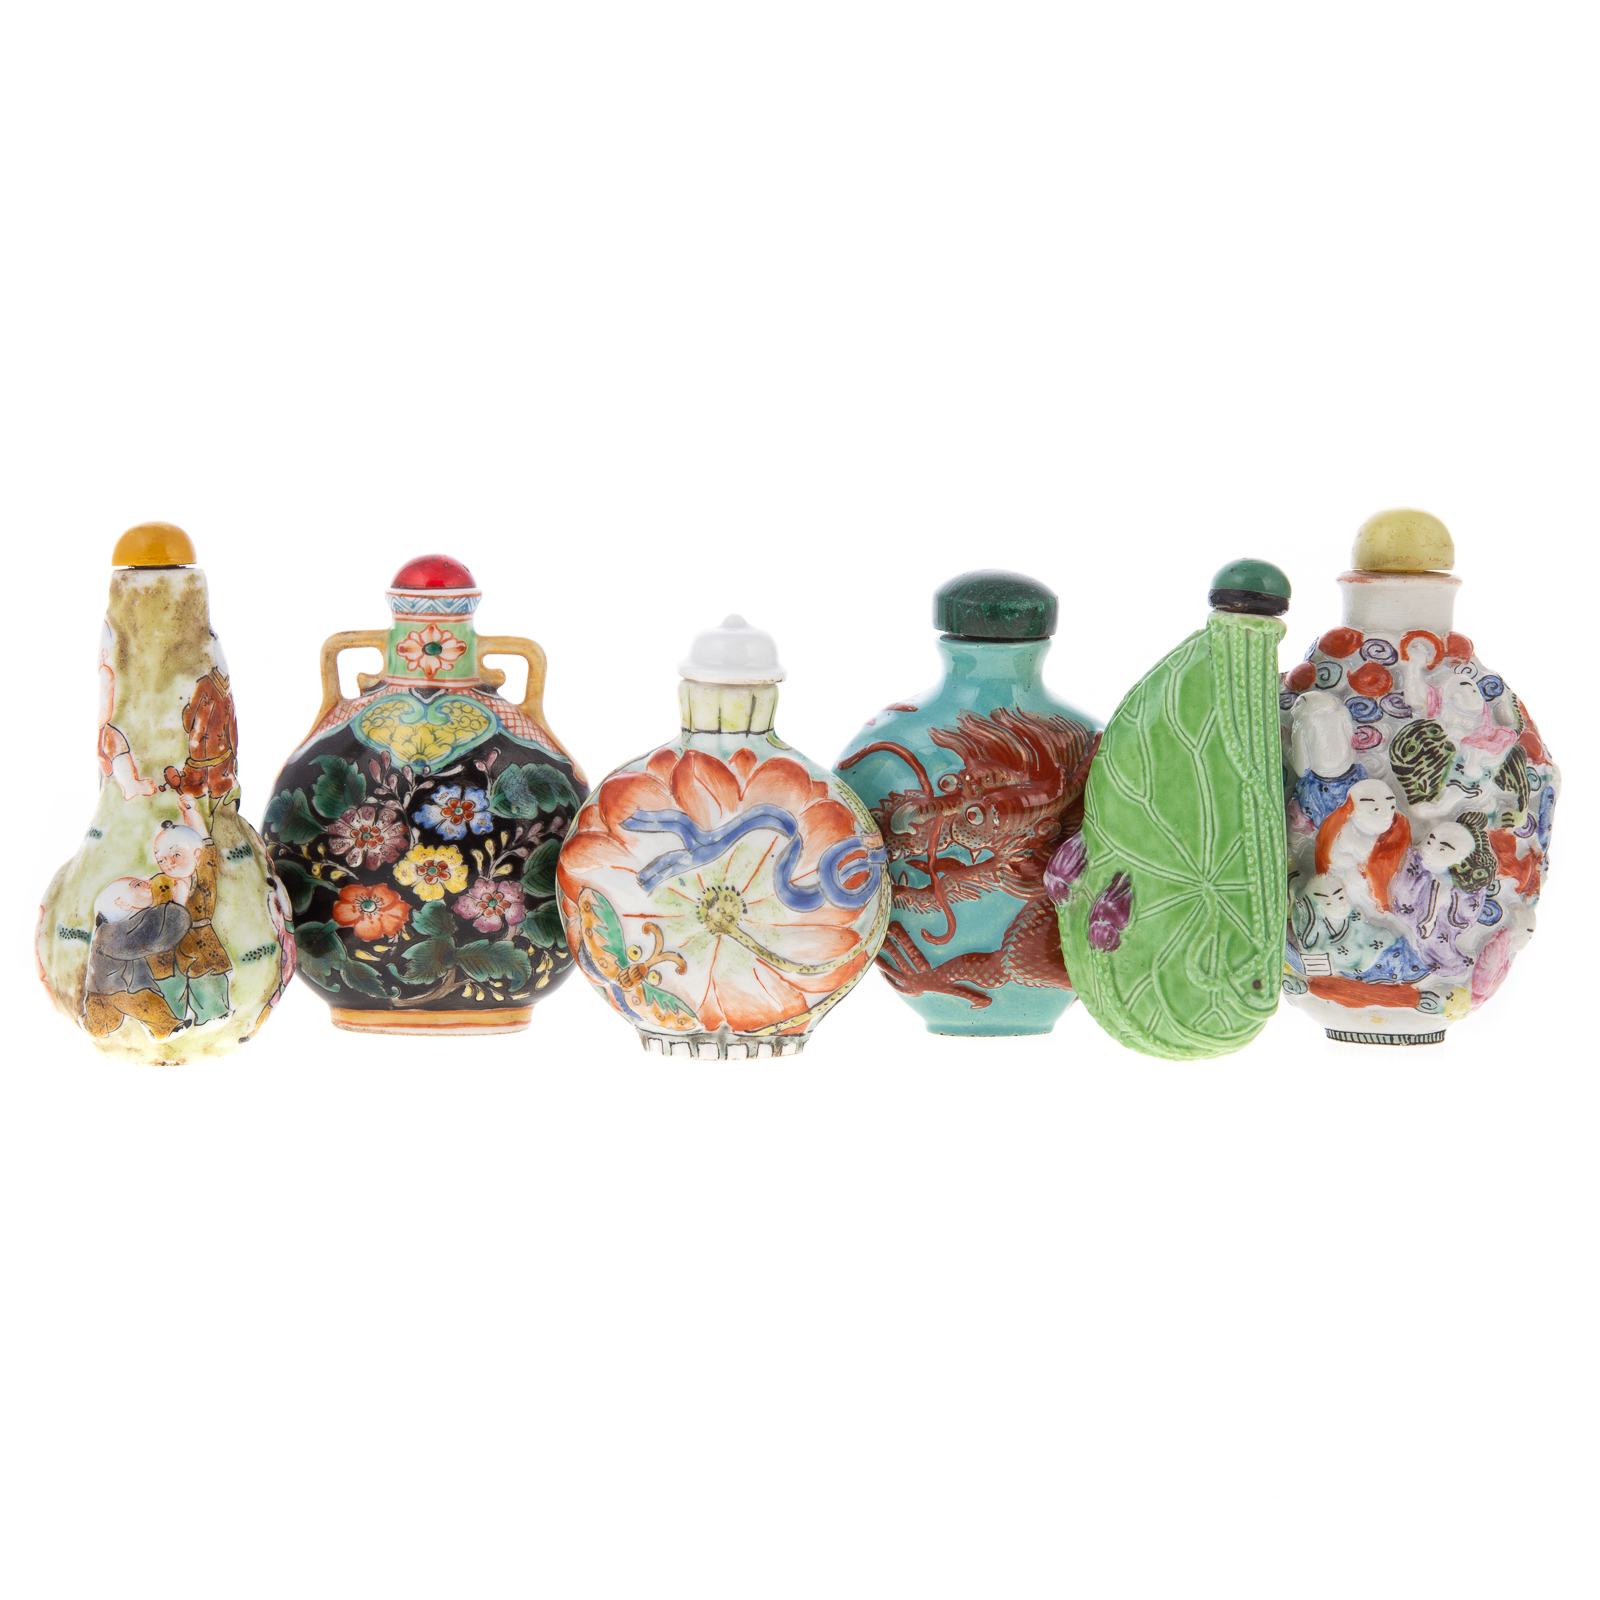 SIX CHINESE PORCELAIN SNUFF BOTTLES 338763